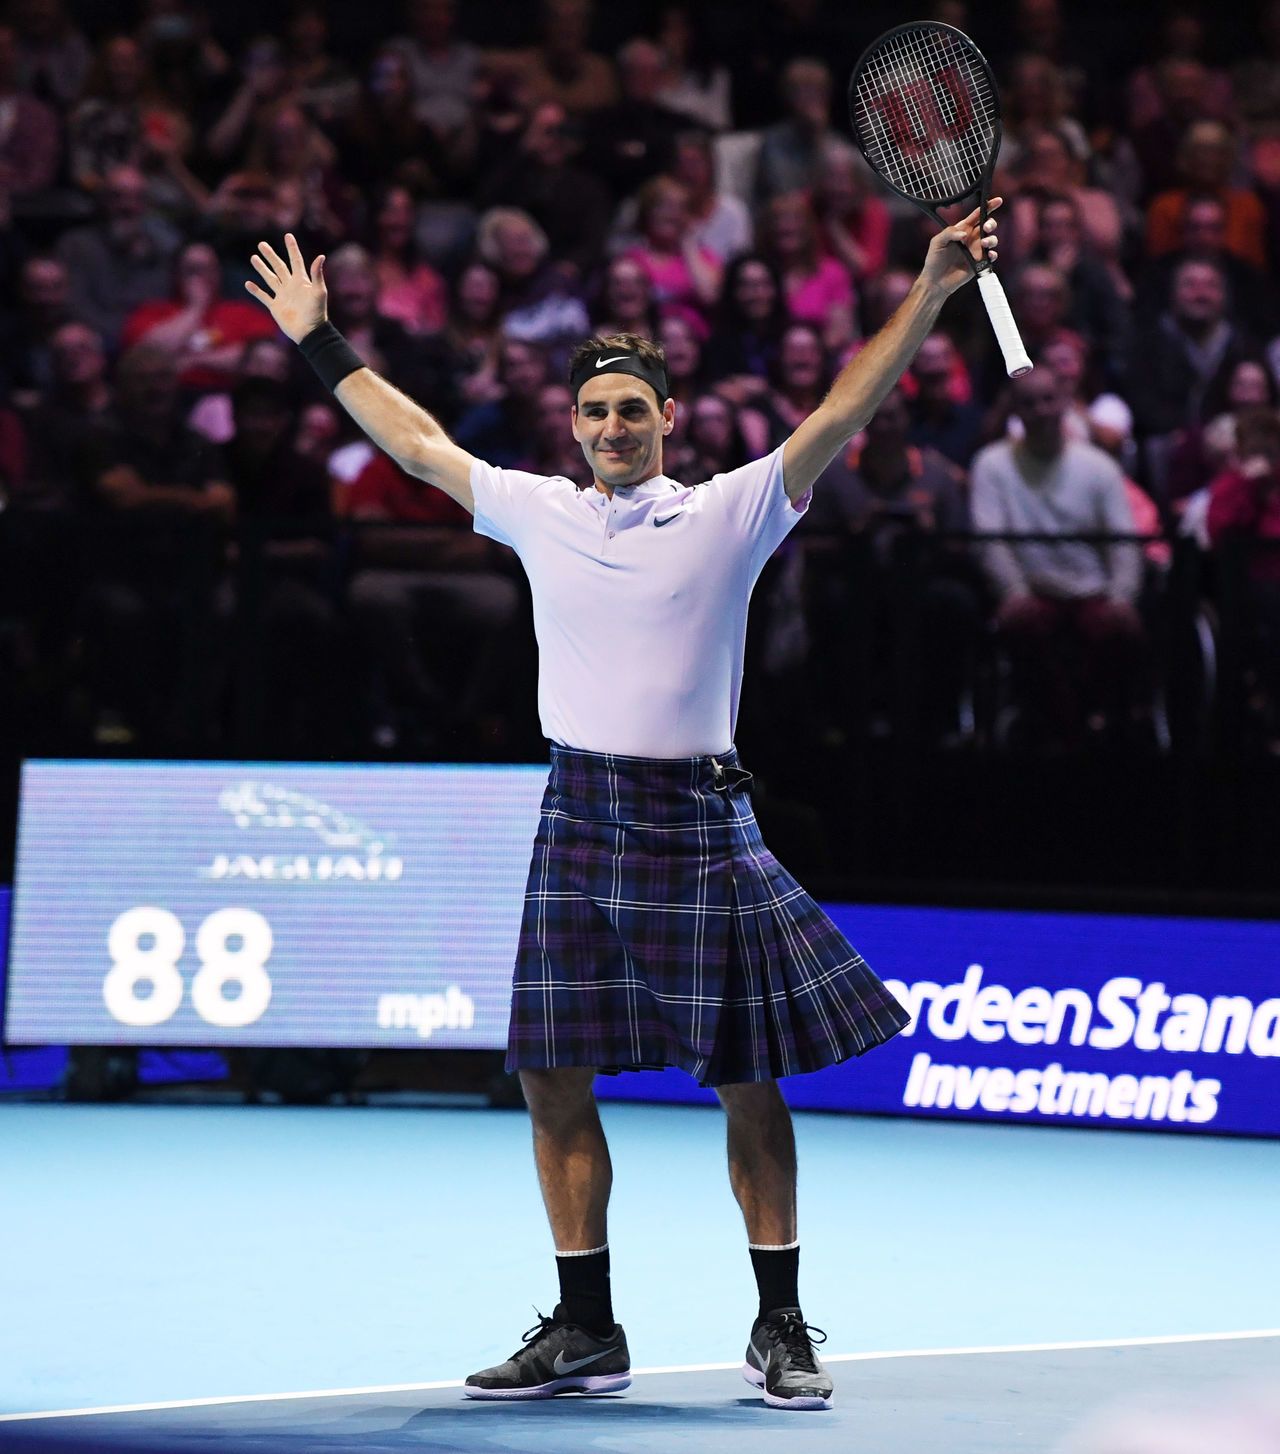 The Swiss maestro takes the applause after winning a point wearing the kilt.